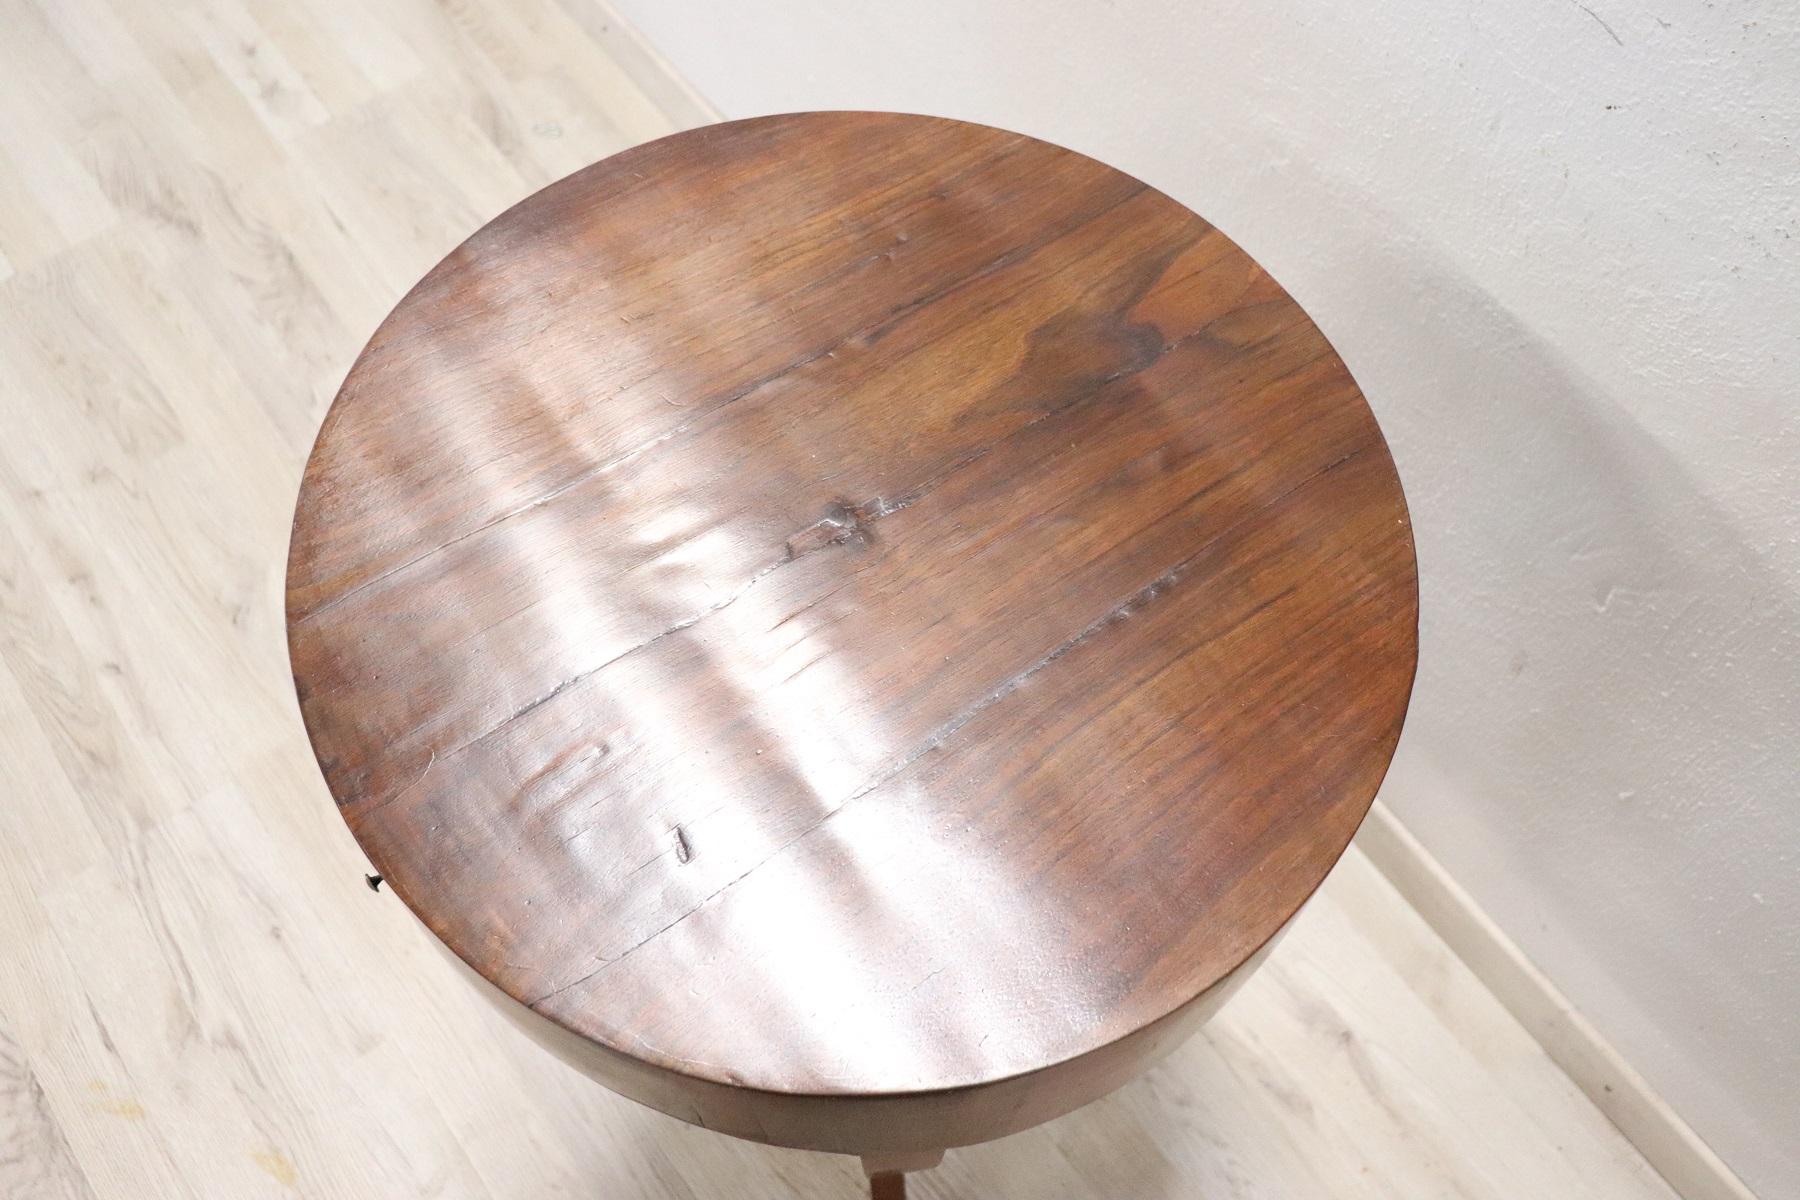 Rare and fine quality Italian Directoire 18th century side table or pedestal table. The round table is made of fine walnut wood with a beautiful patina. Elegant slender and wavy legs. On the front a comfortable drawer. Really delicious table. True